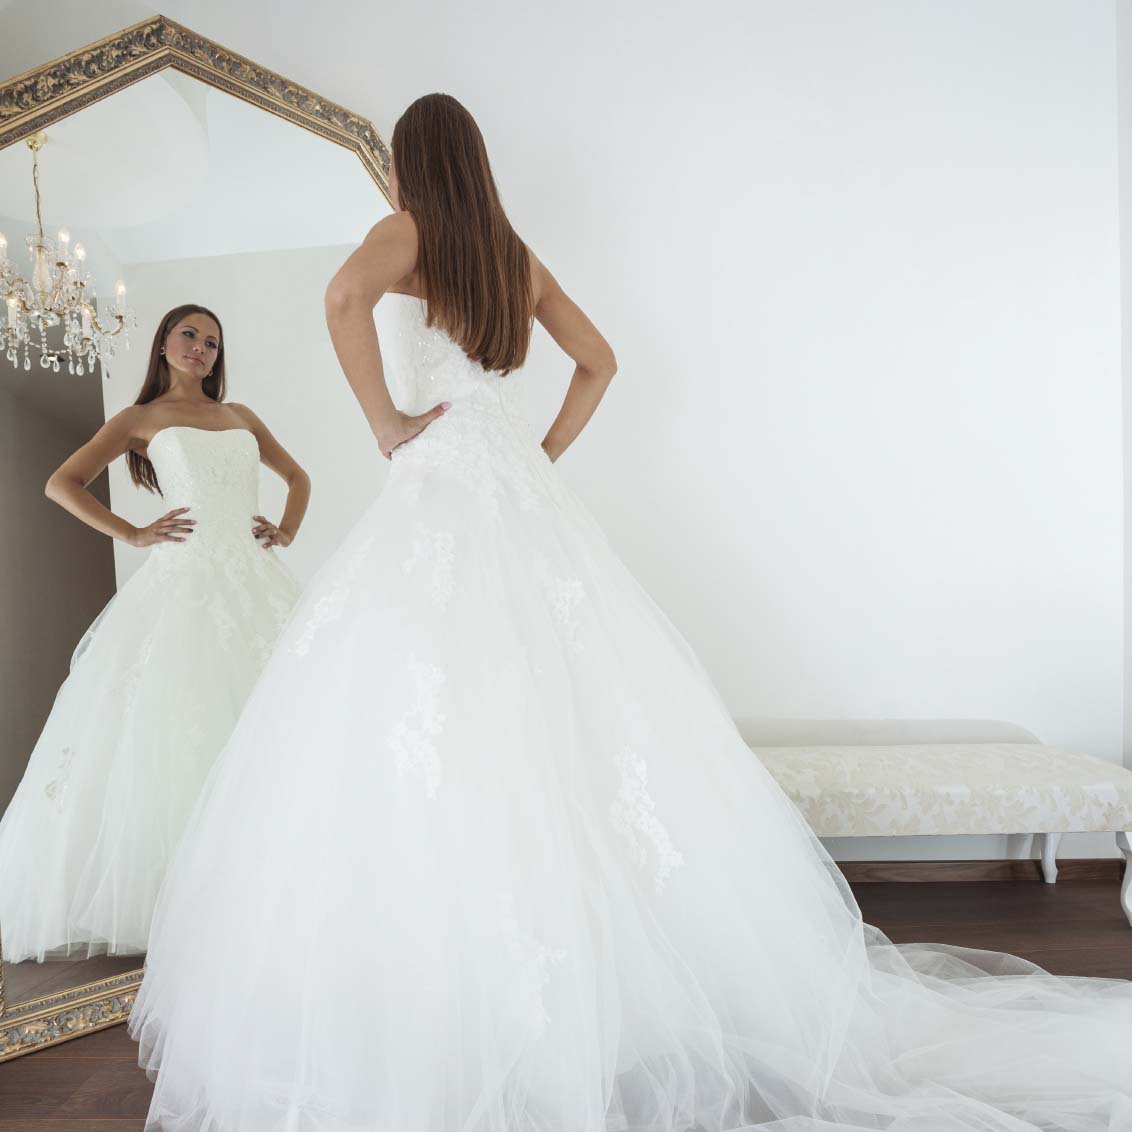 wedding dress shopping mistakes that most brides will make